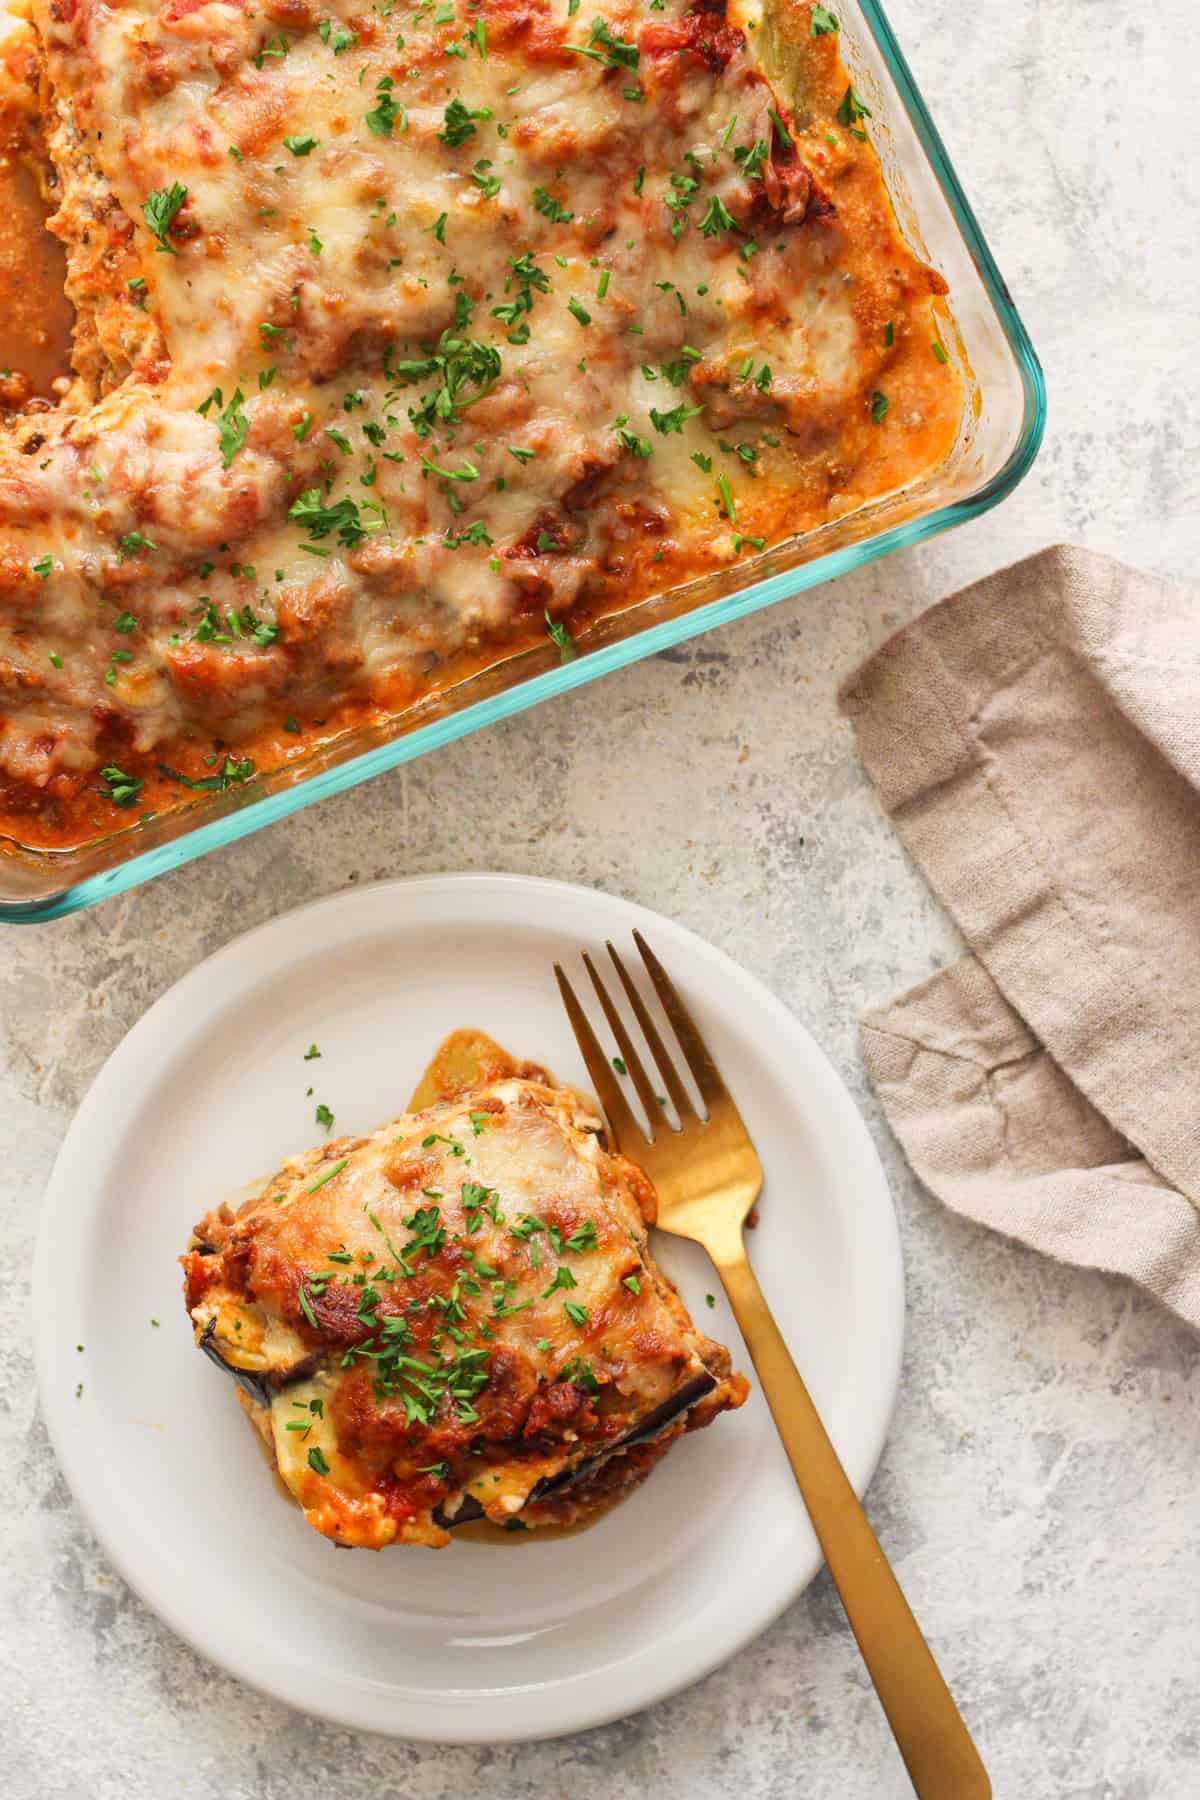 This eggplant lasagna is absolutely cheesy and rich in flavor with layers of eggplant, delicious meat sauce and 3 kinds of cheese! It's made without any noodles, so it's gluten free and low carb. This is a great recipe to use up those eggplants sitting in the fridge. Watch the video to see how to make this recipe, vegetarian option also included!